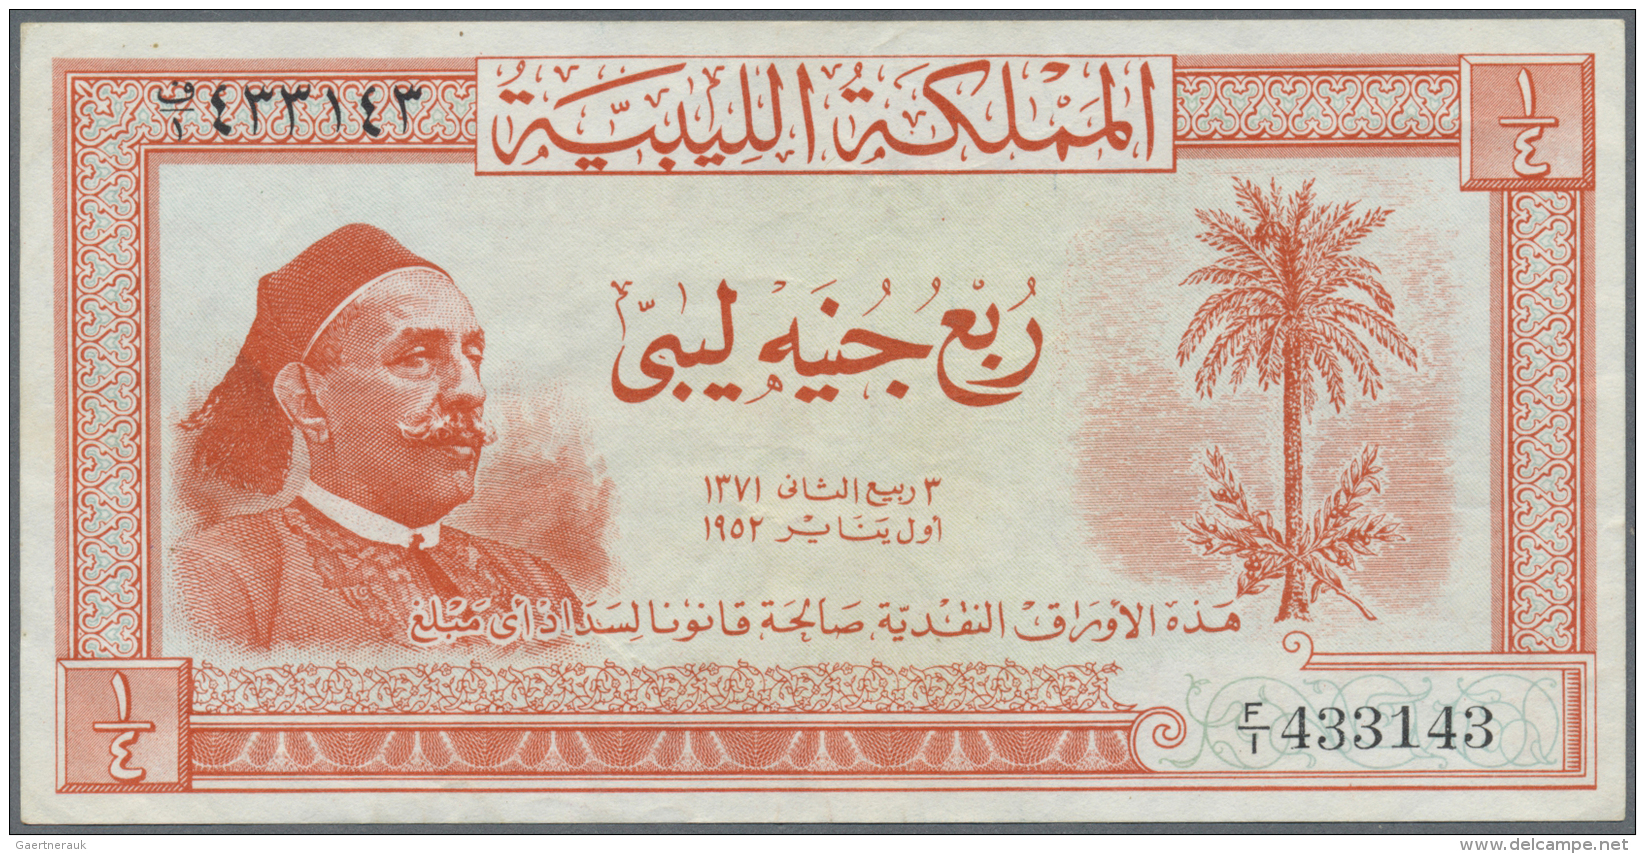 Libya / Libyen: 1/4 Pound 1952, P.14 With Portrait Of King Muhammad Idris As Sanussi At Left In Excellent Condition With - Libia